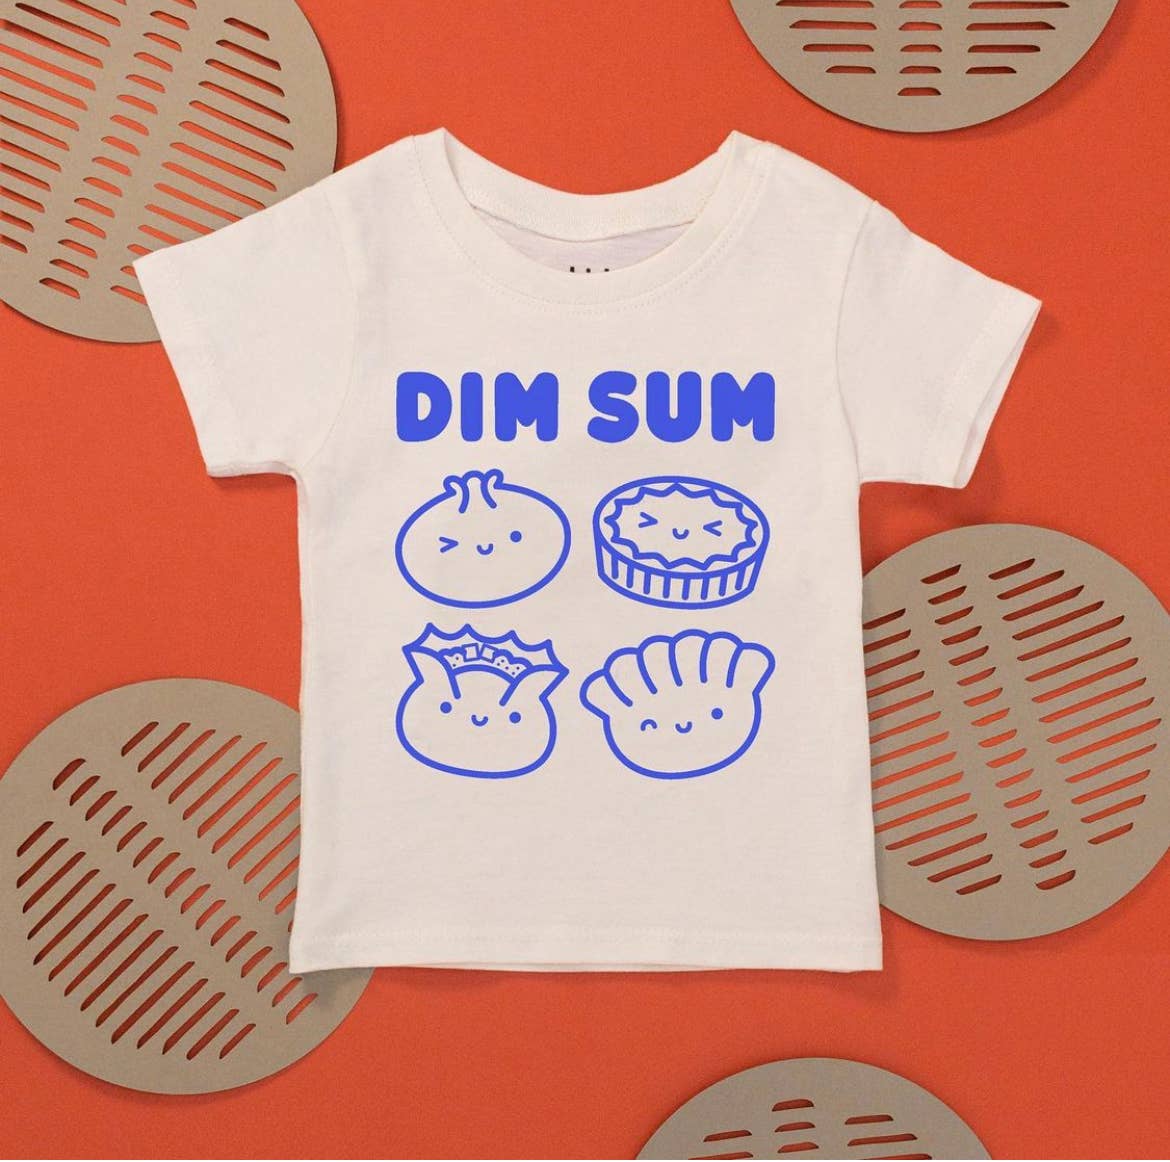 White kids tee with illustrations of various dim sum on it, printed in blue ink and text that reads "Dim Sum" across the chest 